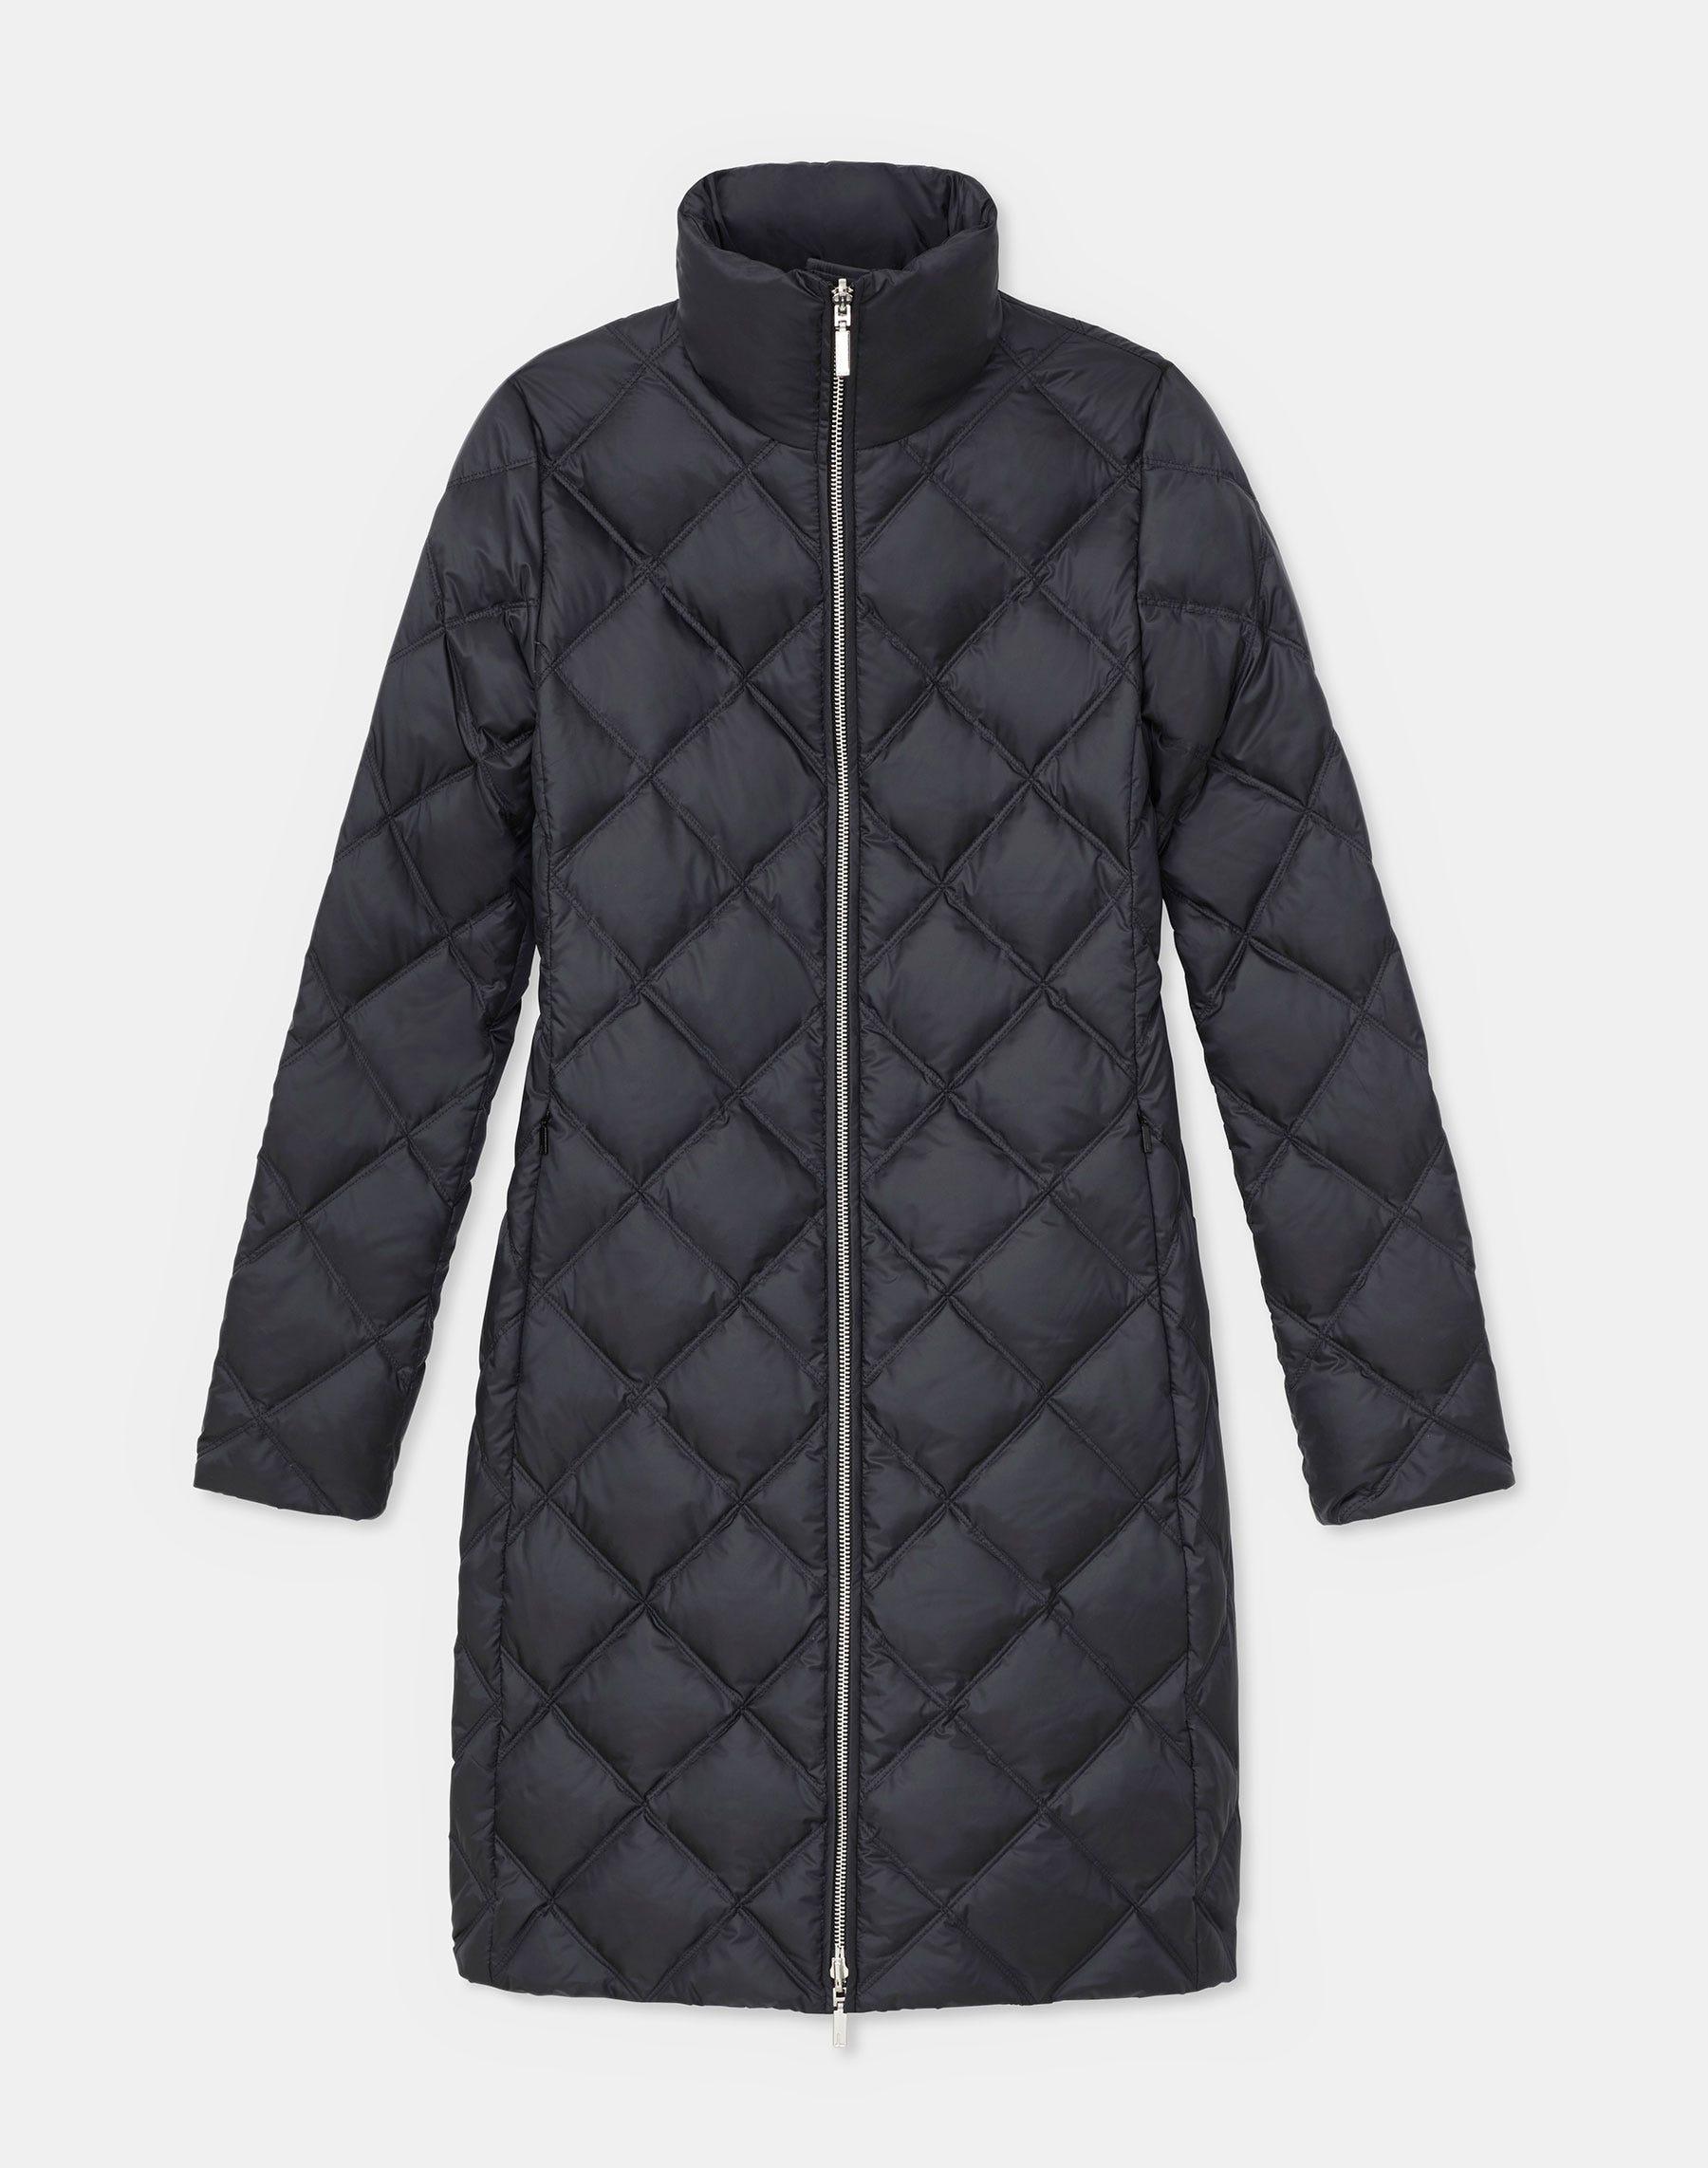 Lafayette 148 New York Isla Reversible Quilted Kindmade Down Coat in ...